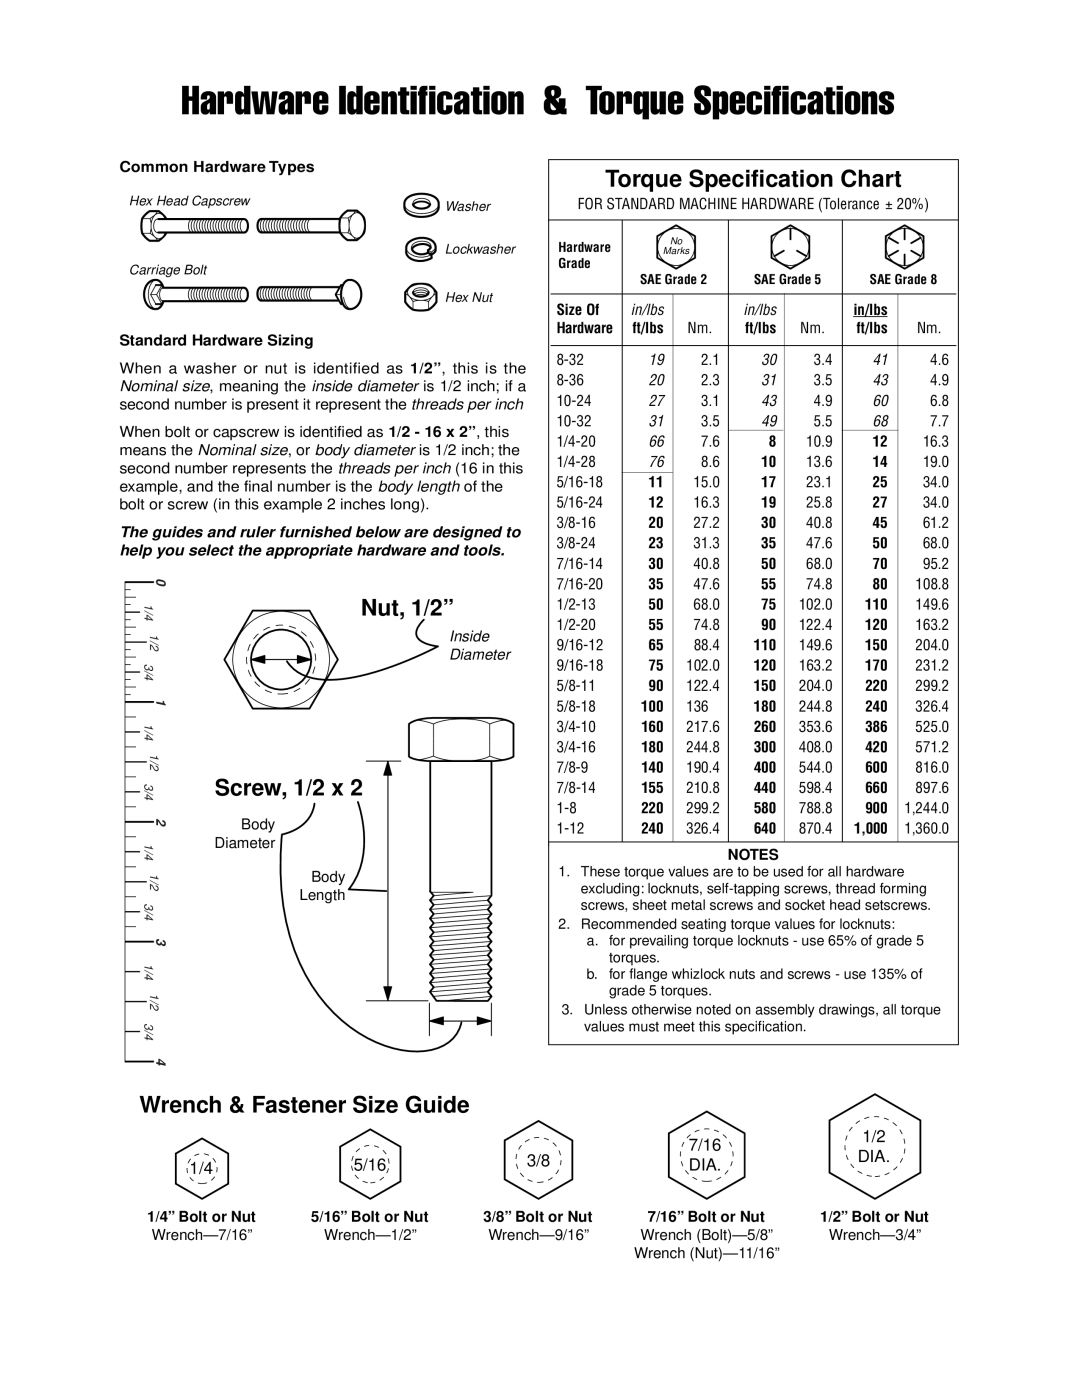 Simplicity Lancer / 4400 Wrench & Fastener Size Guide, Hardware Identification & Torque Specifications, Nut, 1/2”, 7/16 